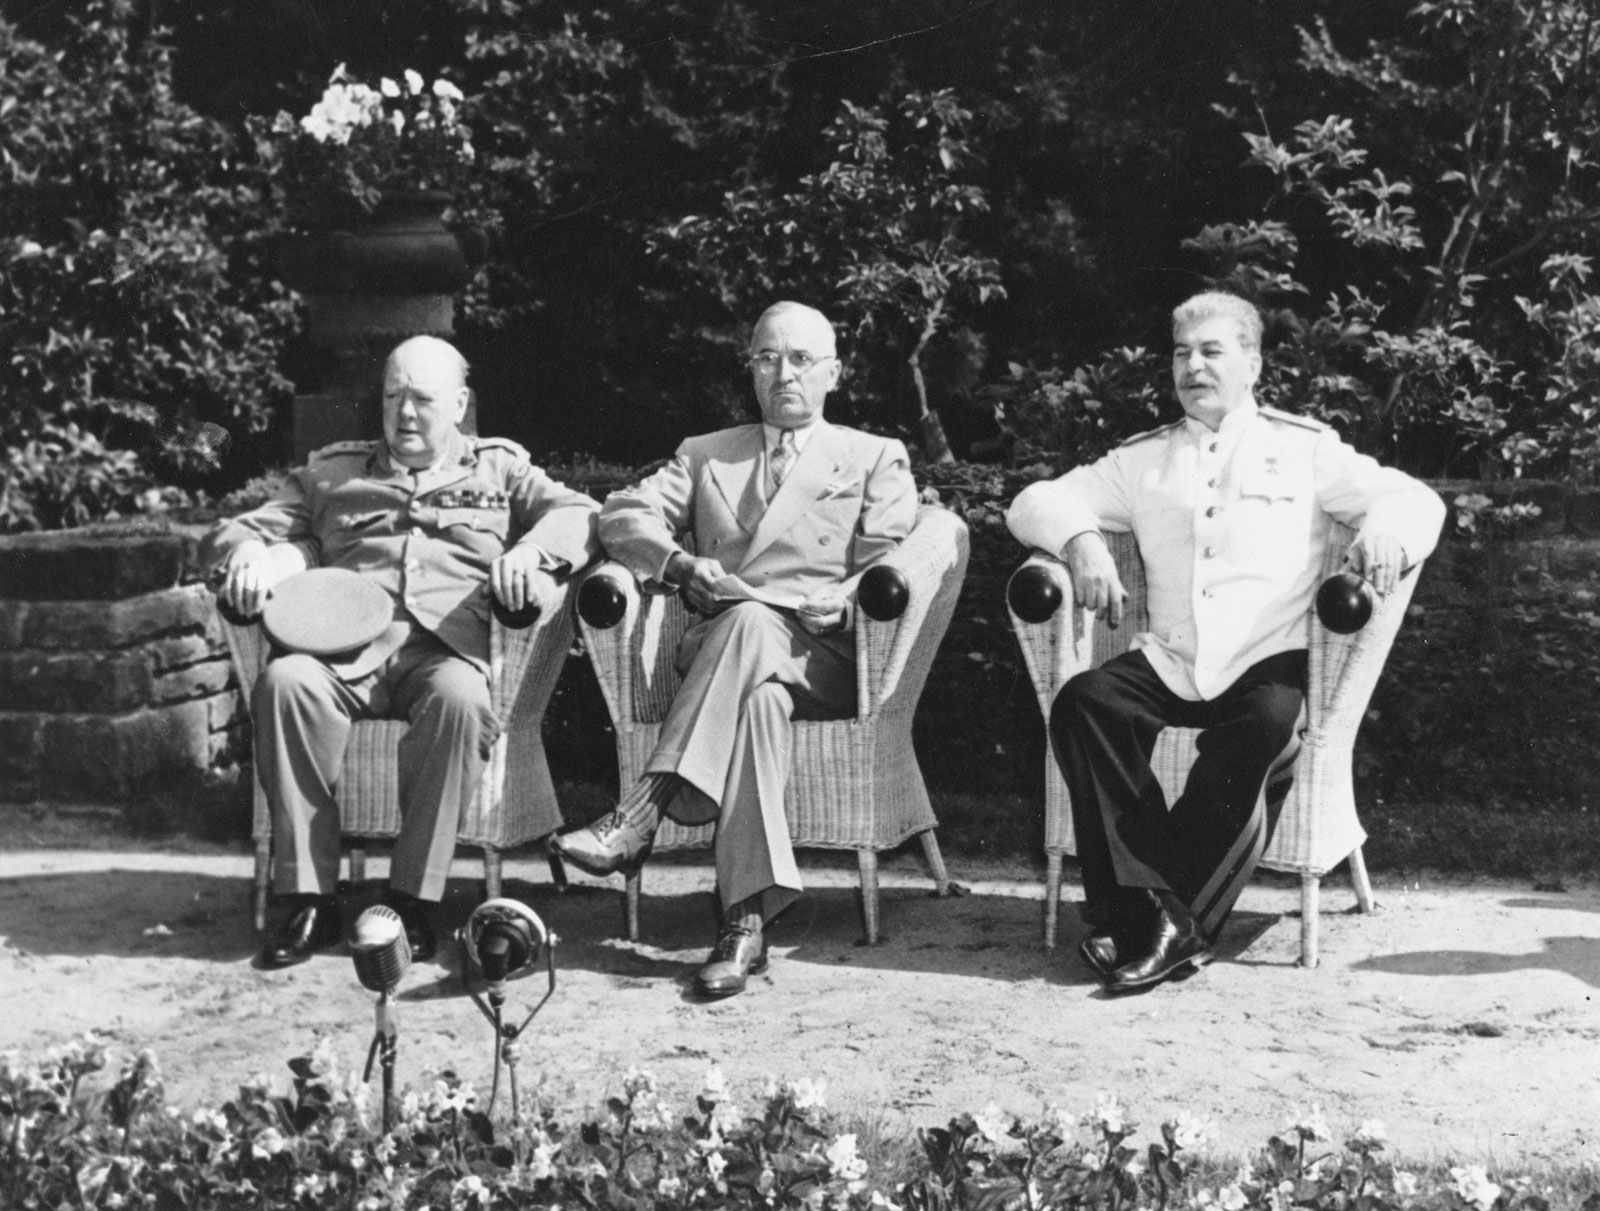 This General Knowledge Quiz Is Not That Hard, So to Impress Me, You’ll Need to Score 16/20 Winston Churchill British Joseph Stalin Meeting Soviet July 1945